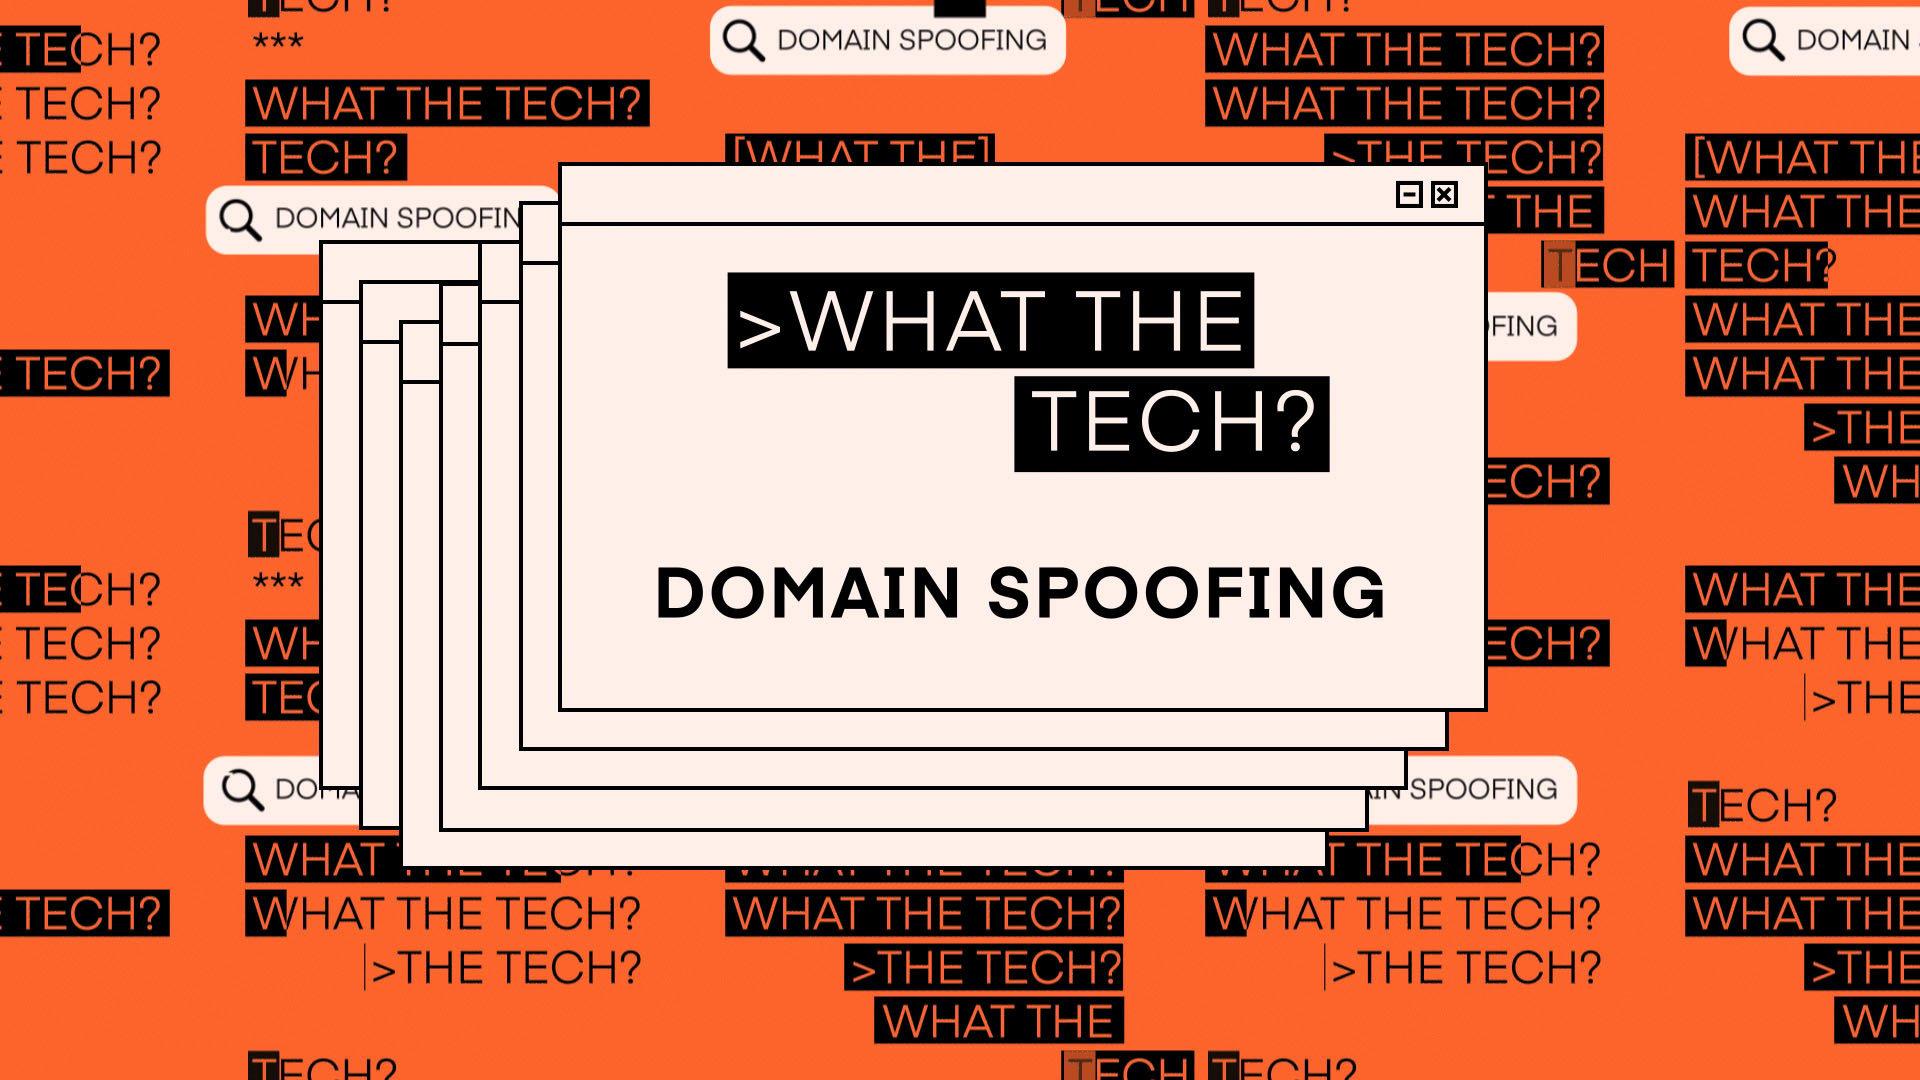 What the tech is domain spoofing?